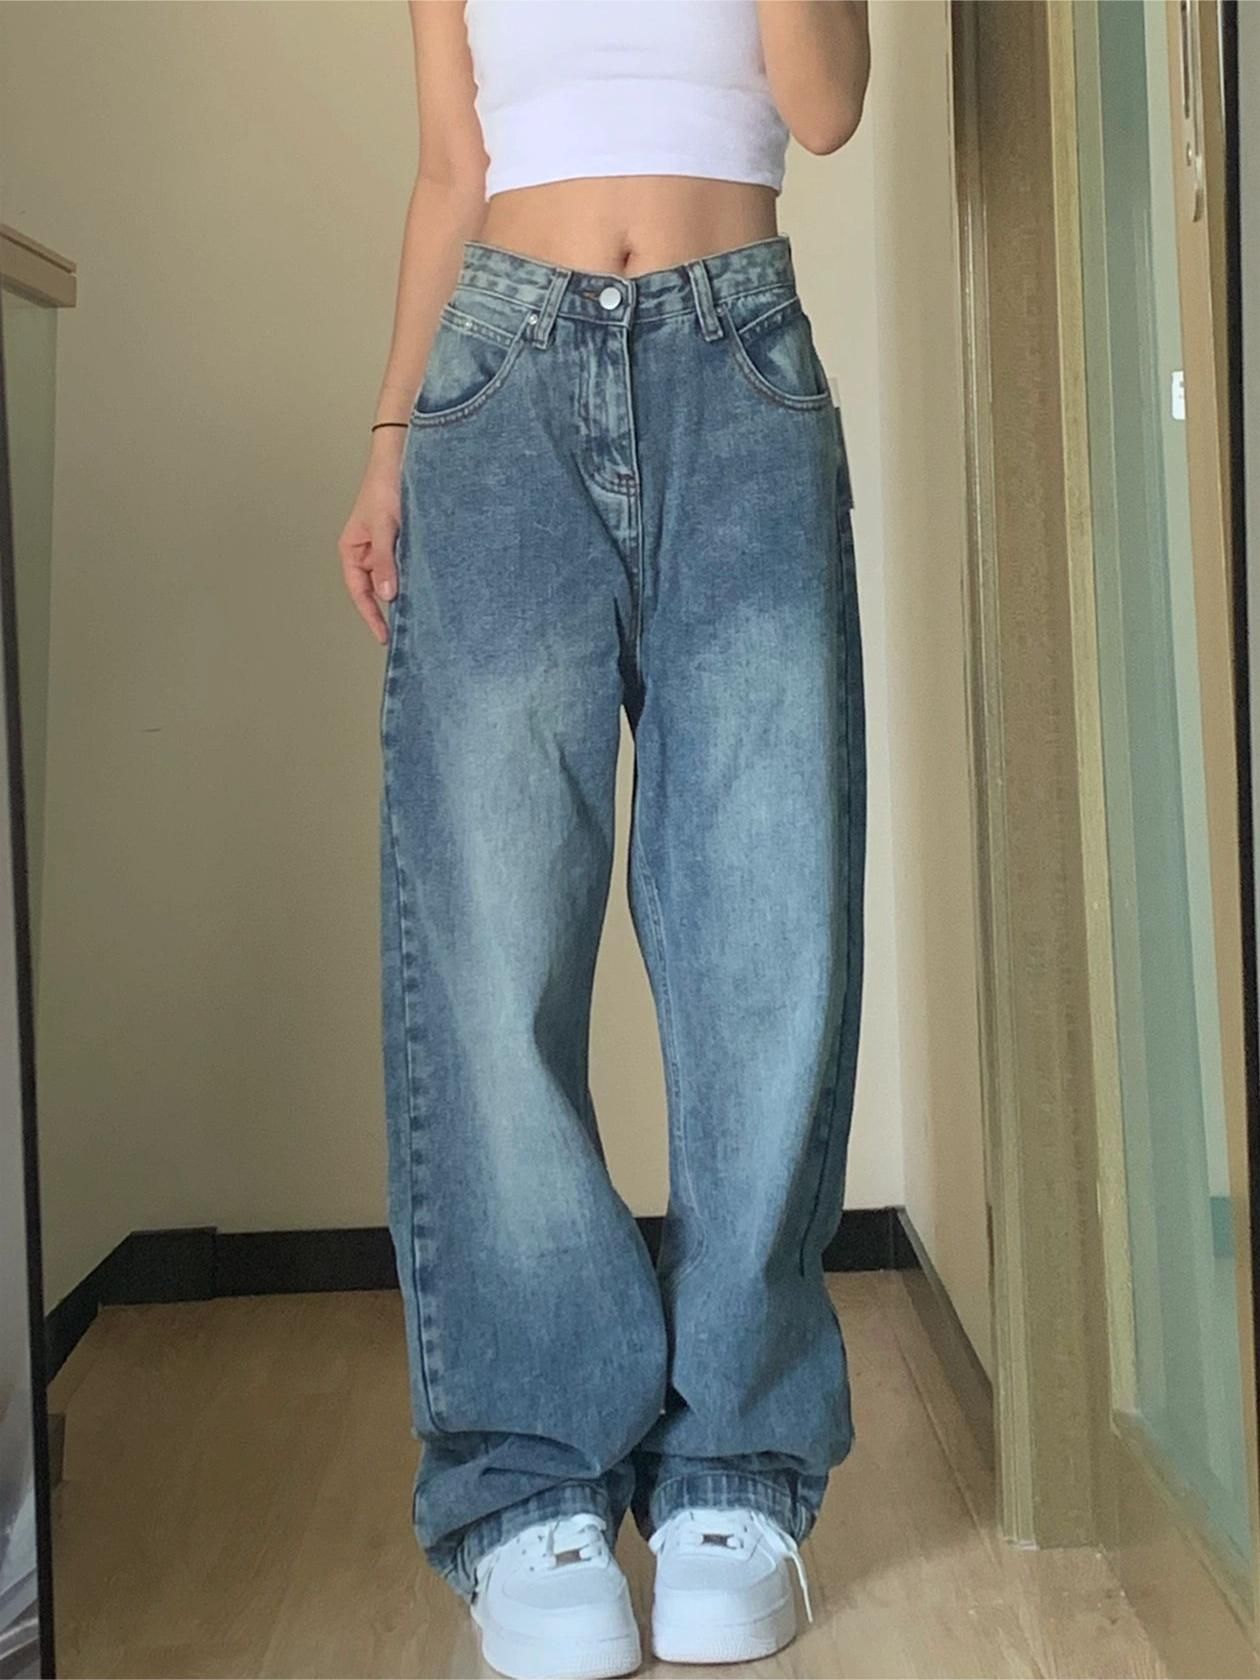 Casual Cool: Embracing Comfort with Boyfriend Jeans